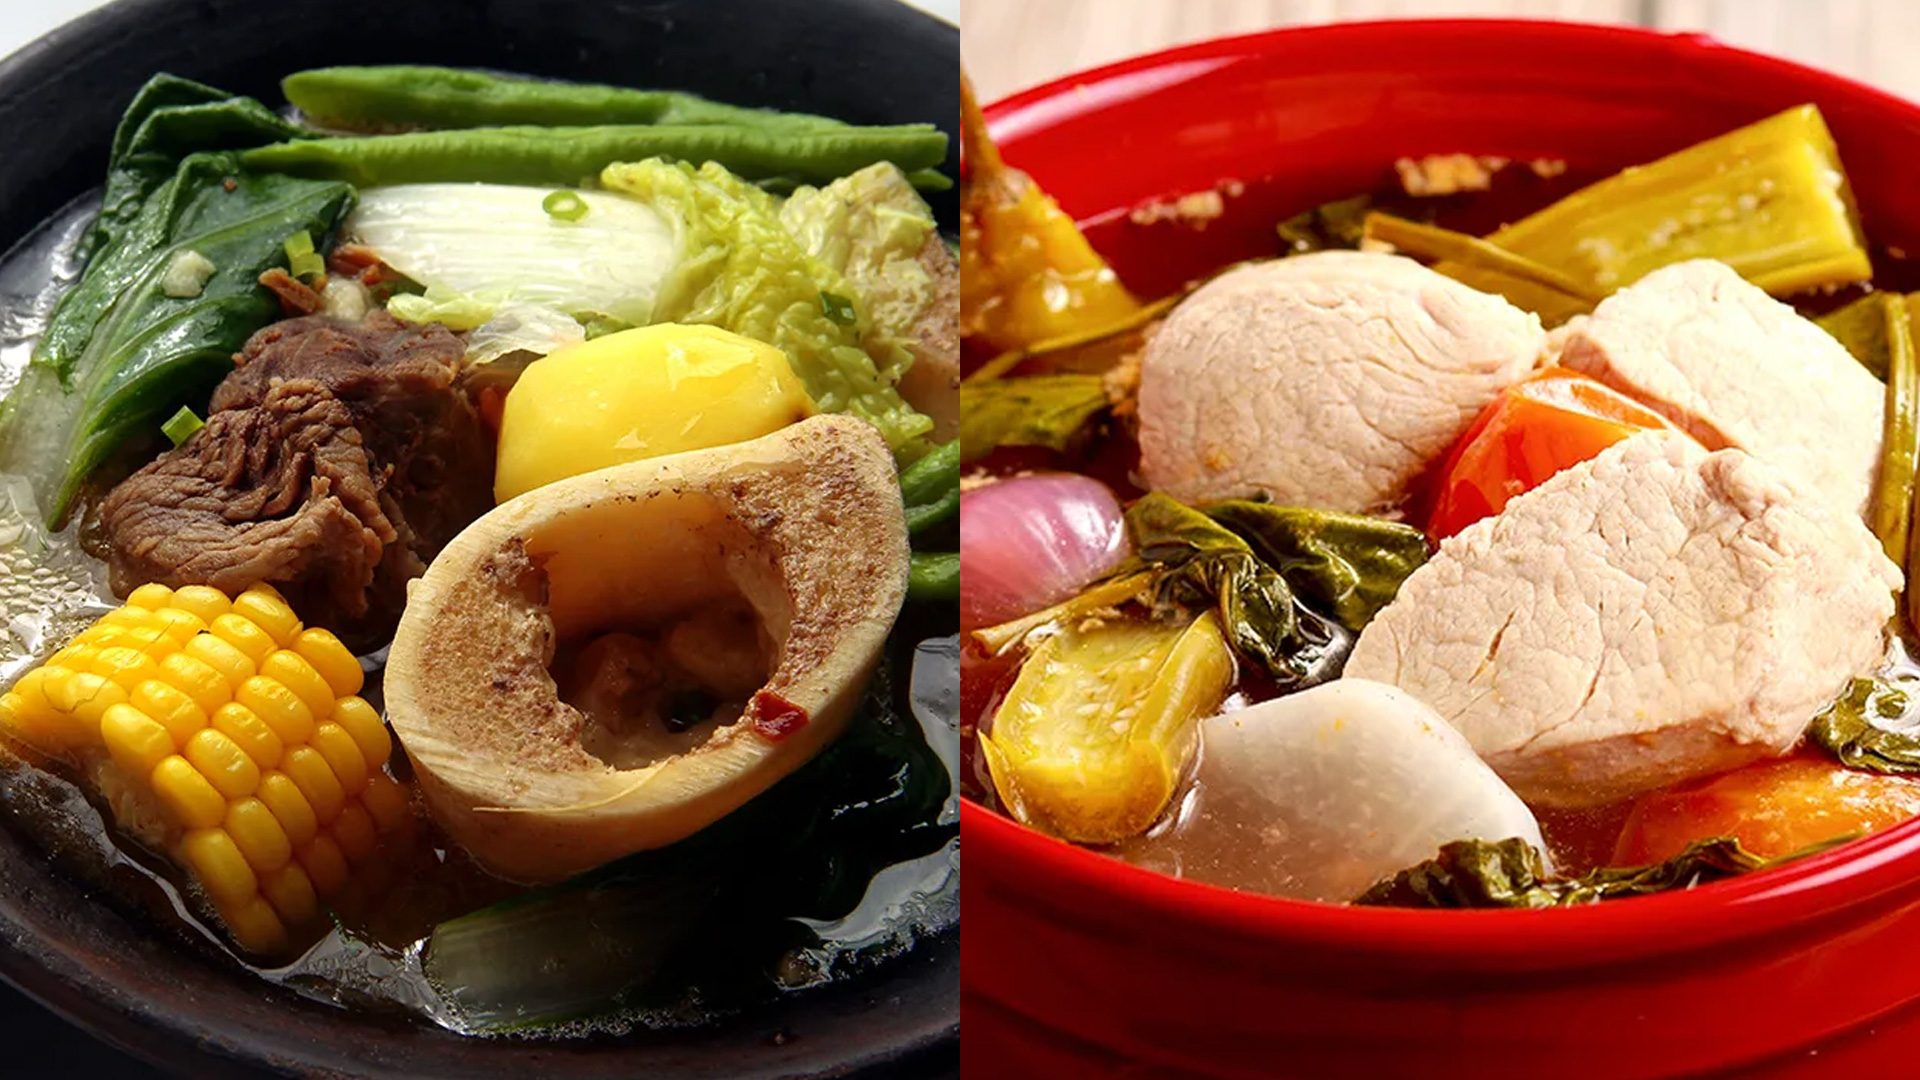 Soup-rise! Sinigang na baboy, bulalo among Best Soups in the World according to Taste Atlas